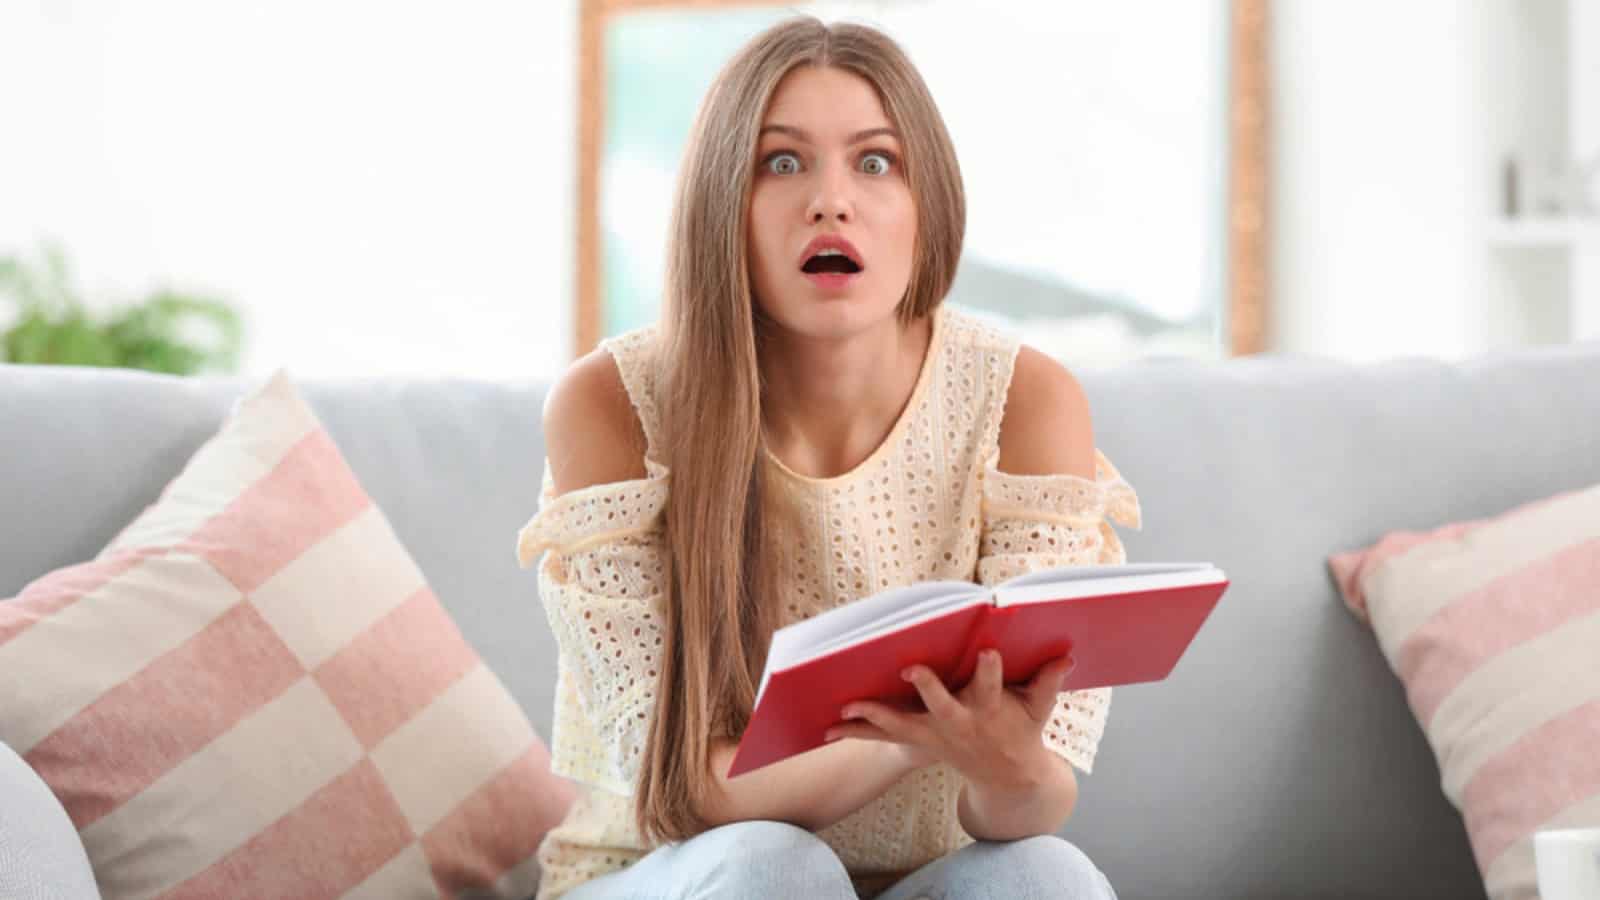 Woman terribly shocked reading book